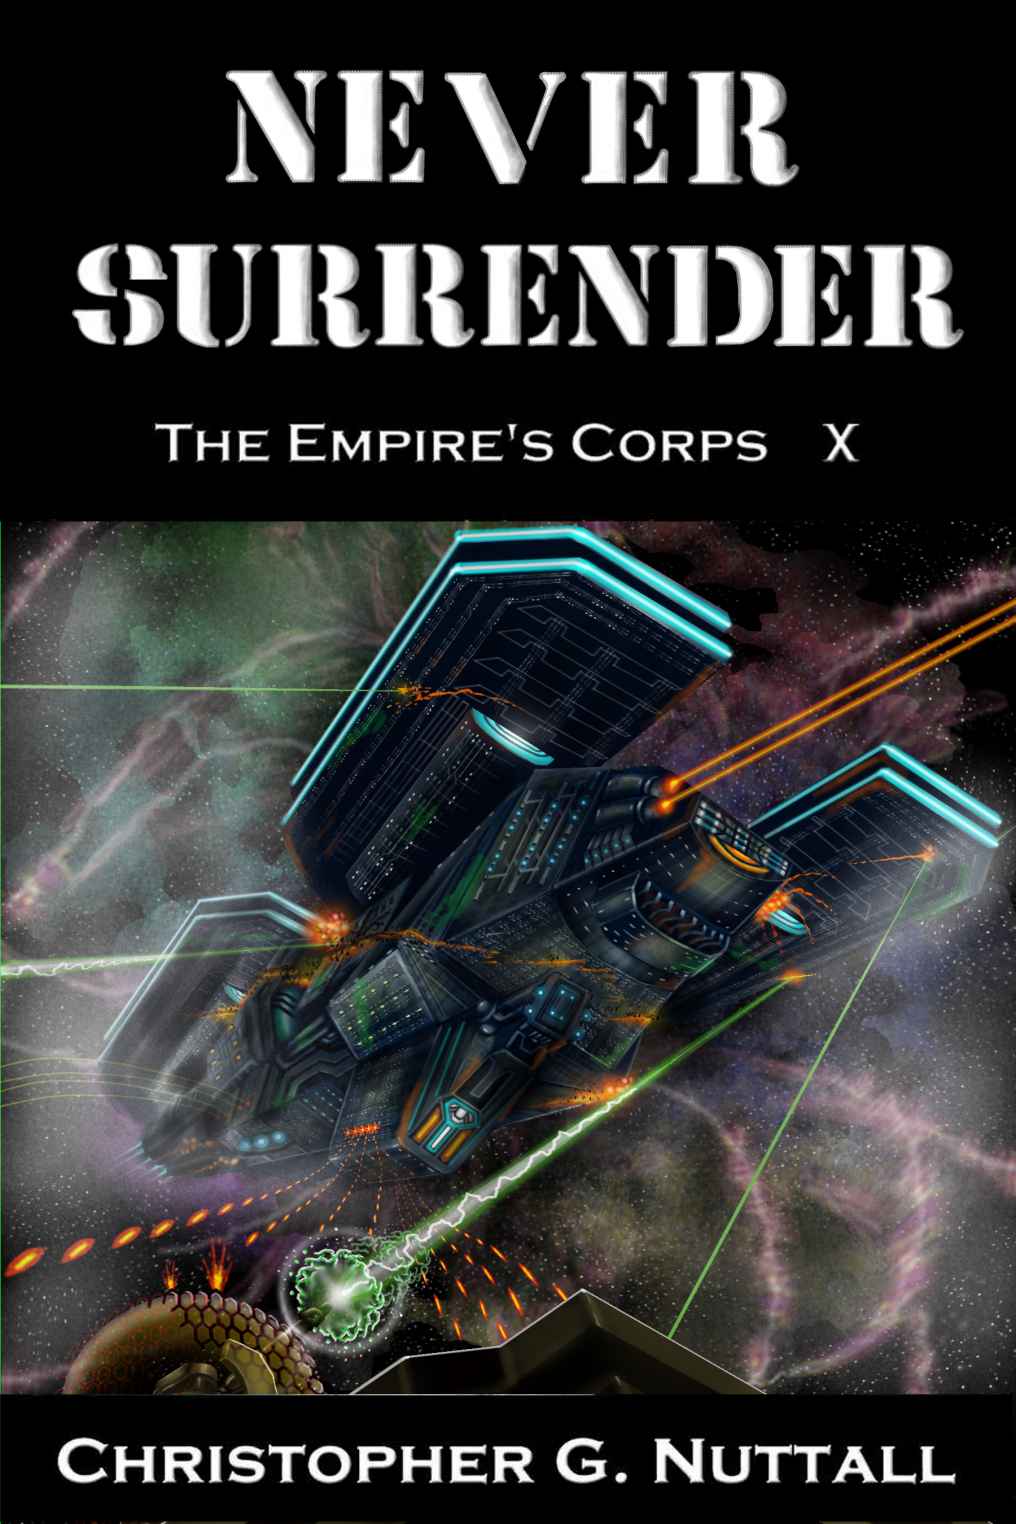 Never Surrender (The Empire's Corps Book 10) by Christopher Nuttall